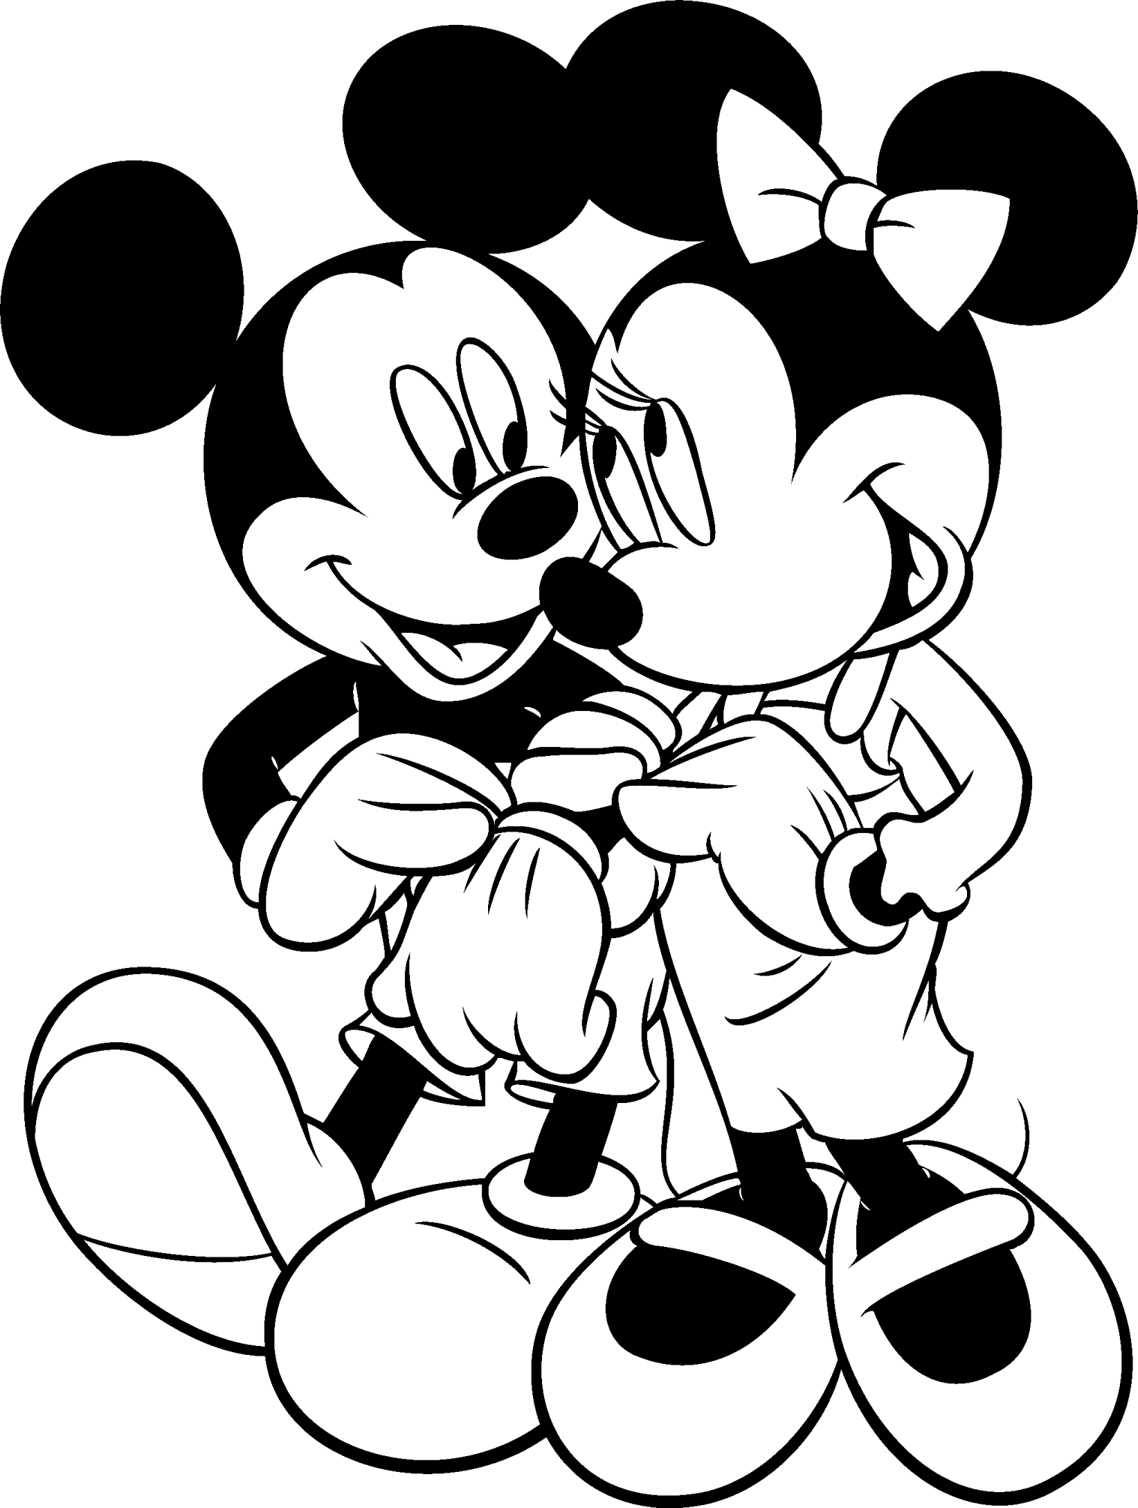 Disney Valentines Coloring Pages >> Disney Coloring Pages